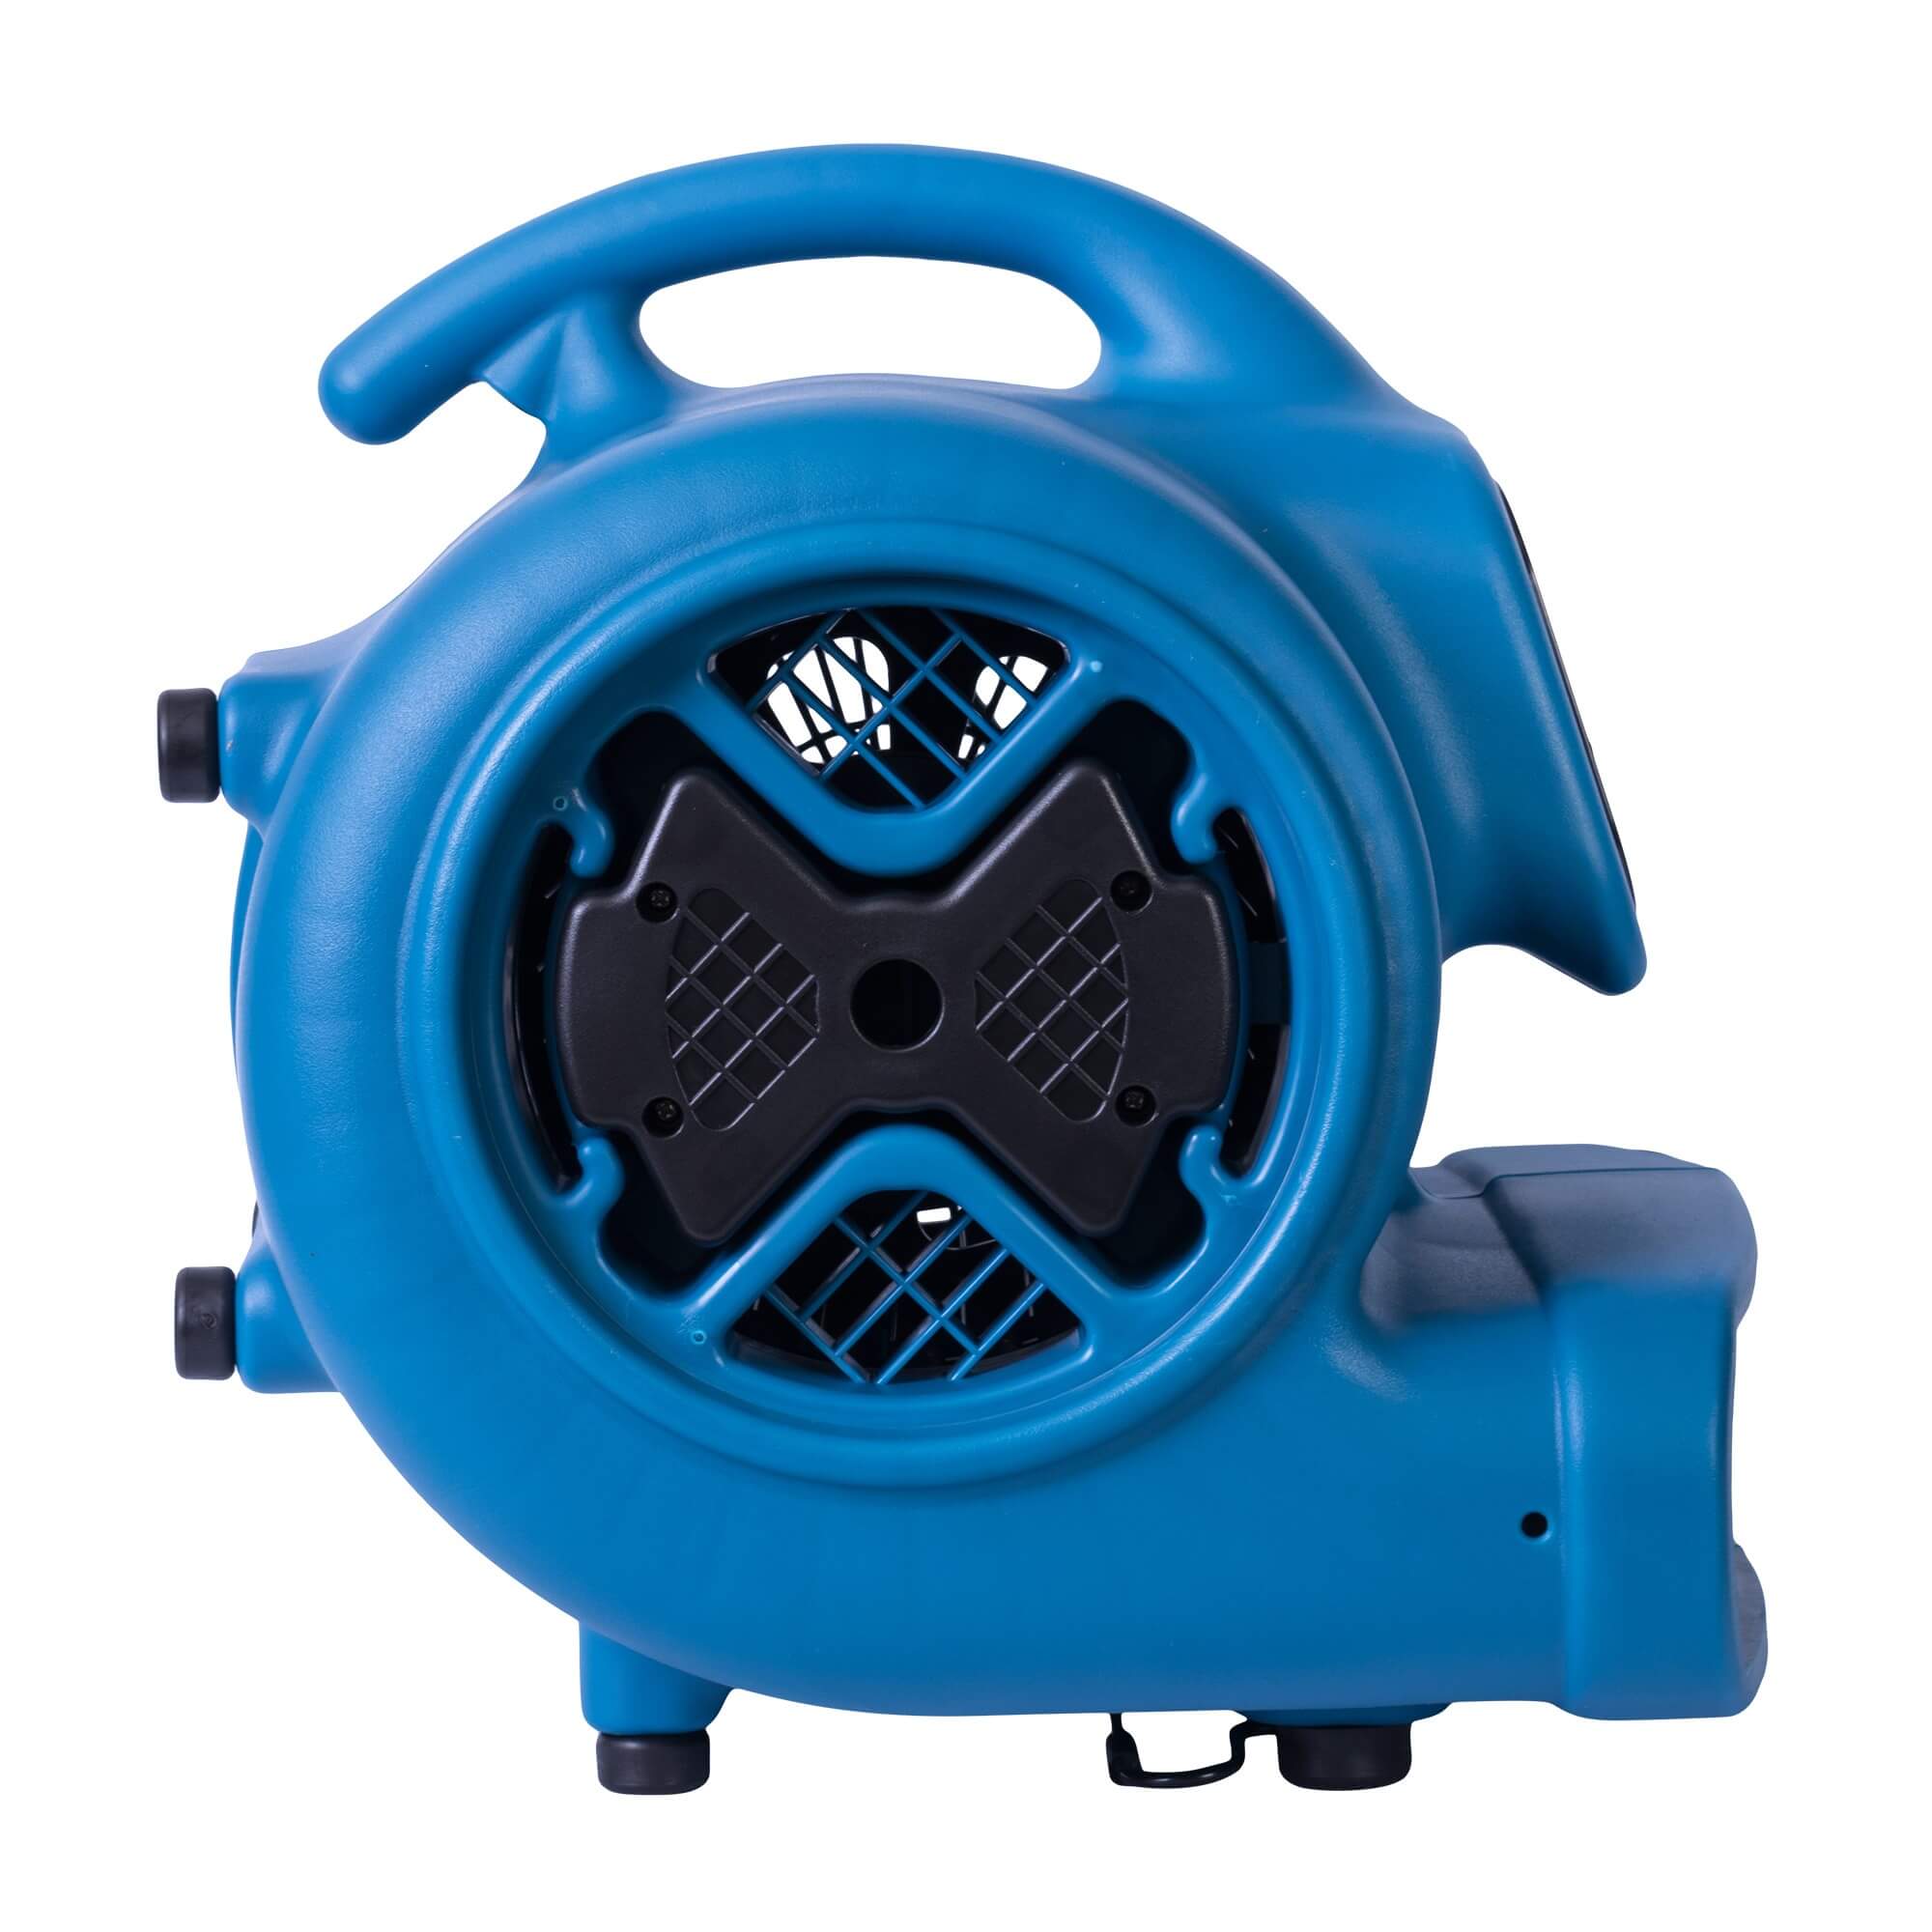 XPOWER P-630 1/2 HP 2980 CFM 3 Speed Air Mover, Carpet Dryer, Floor Fan,  Blower » XPOWER Manufacture